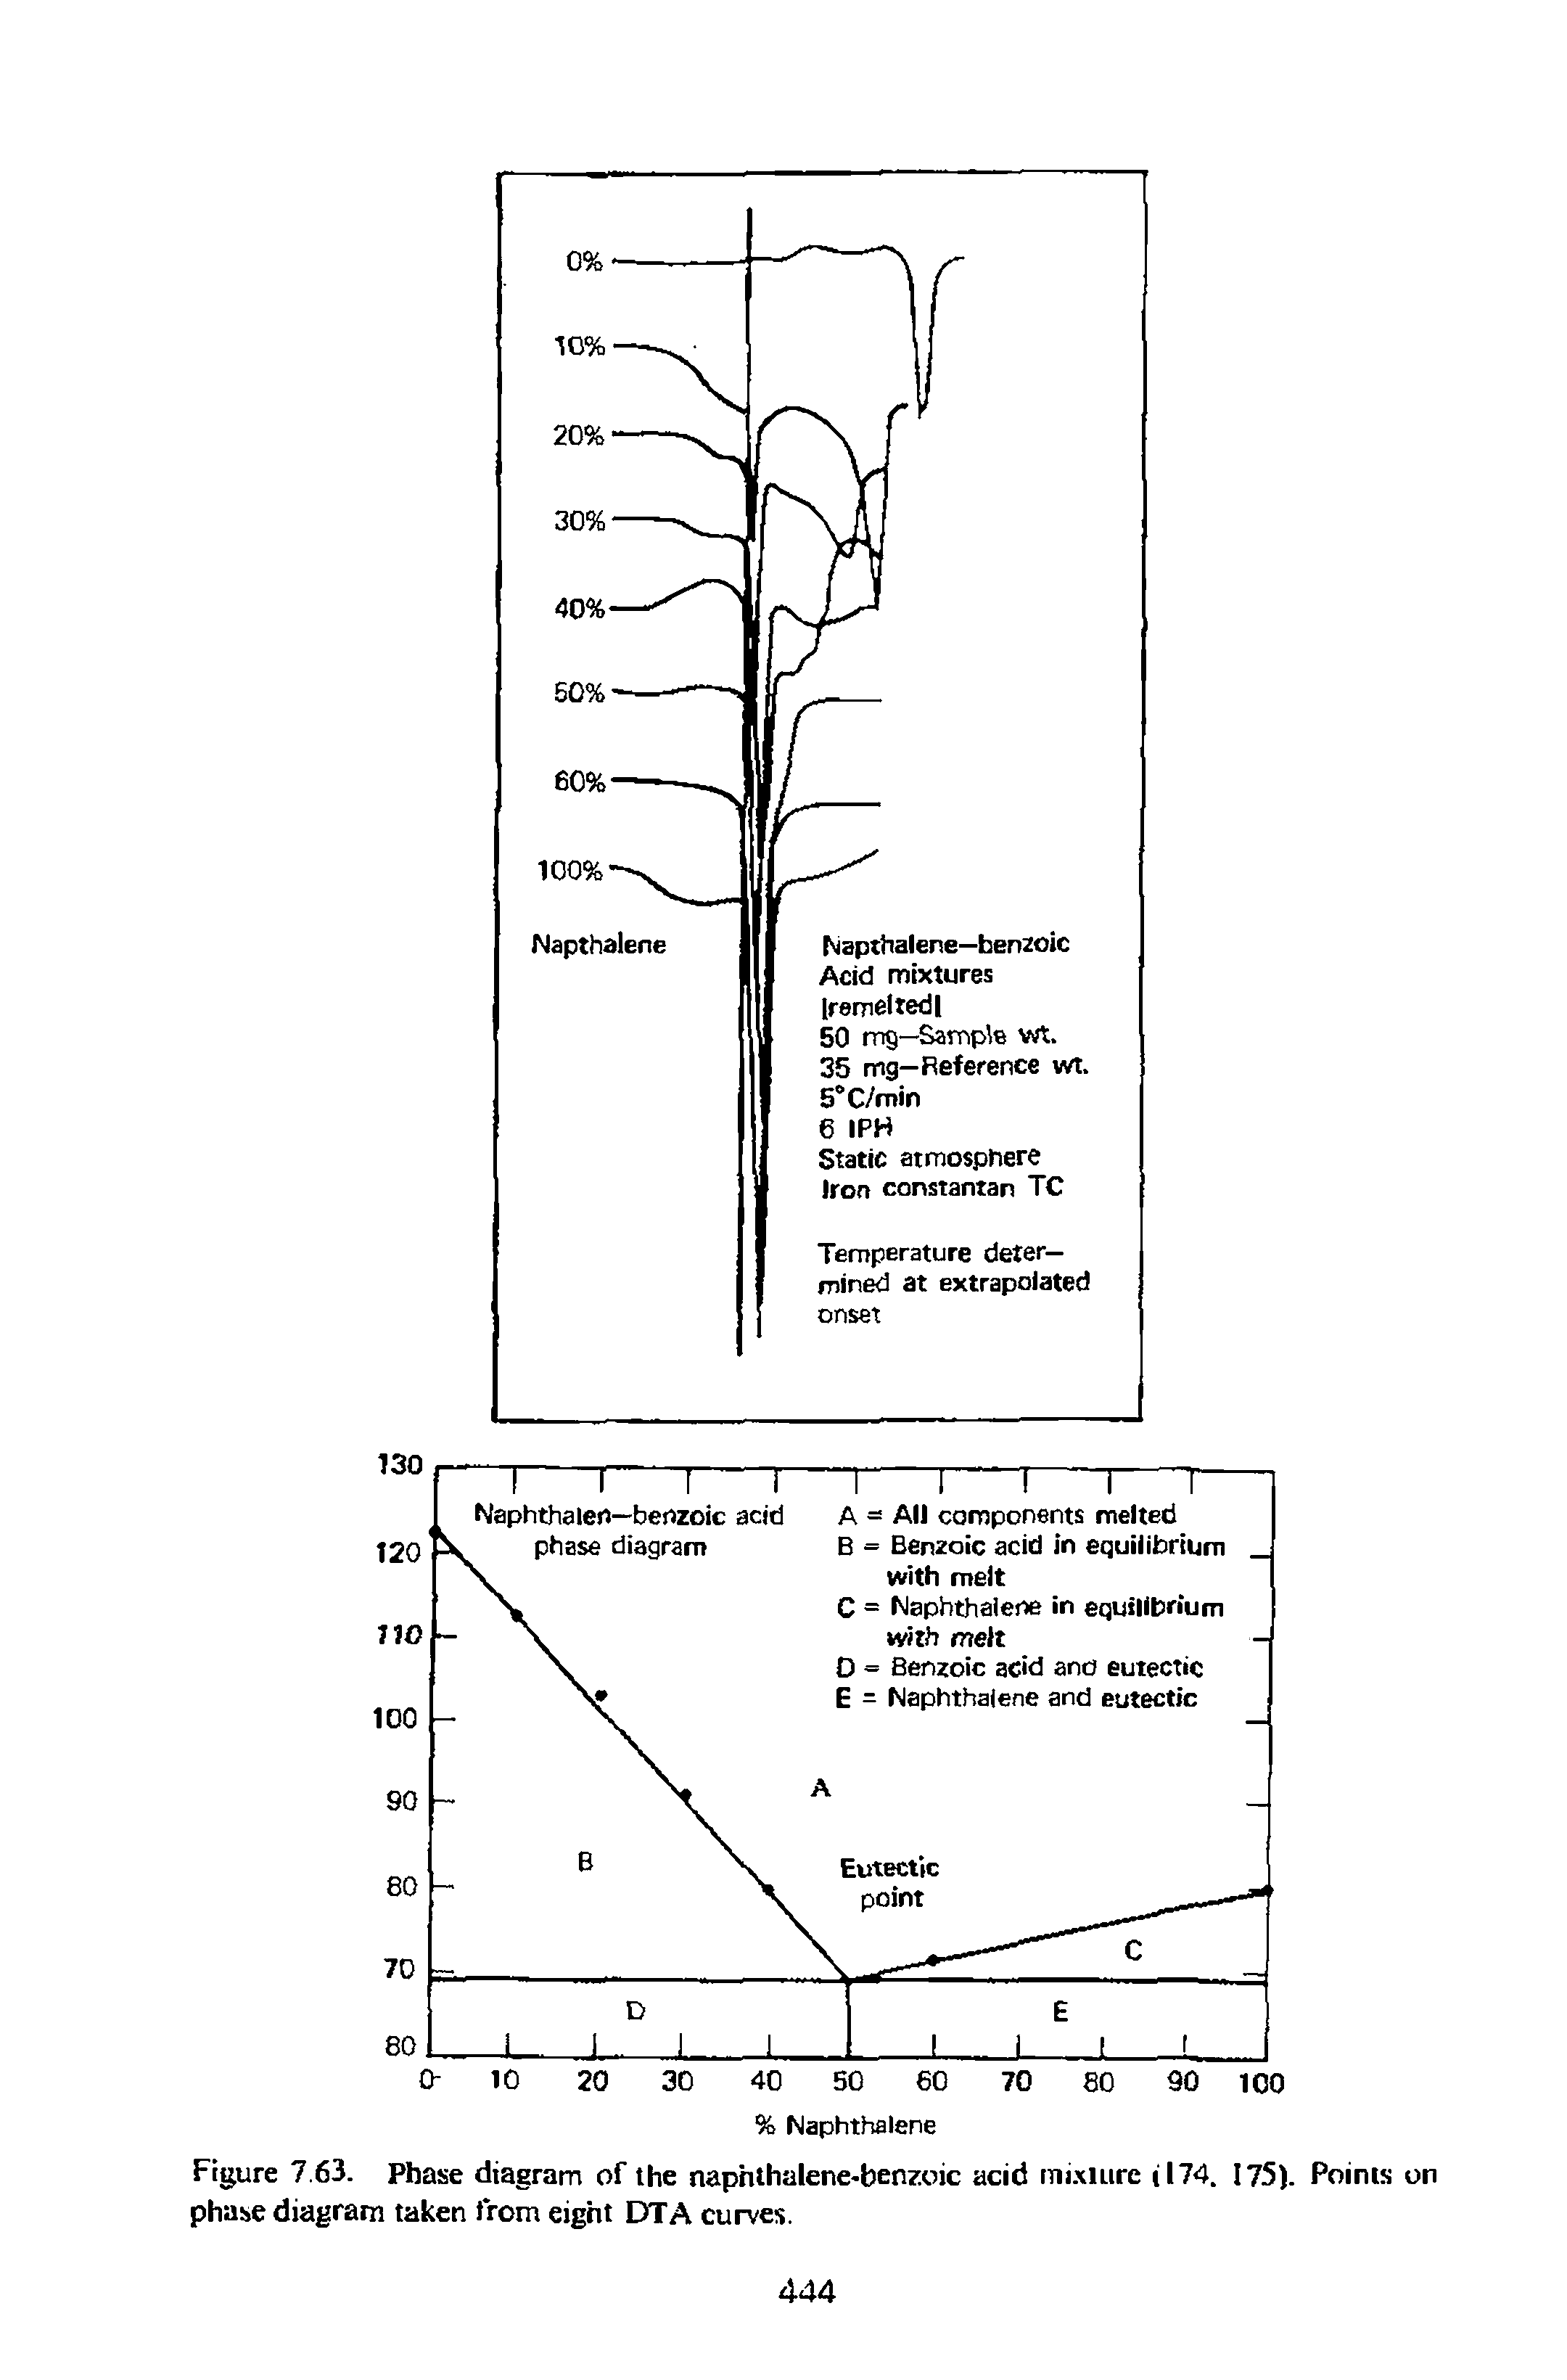 Figure 7.63. Phase diagram of the naphthalene-benzoic acid mixture il74. 175). Points on phase diagram taken from eight DTA curves.